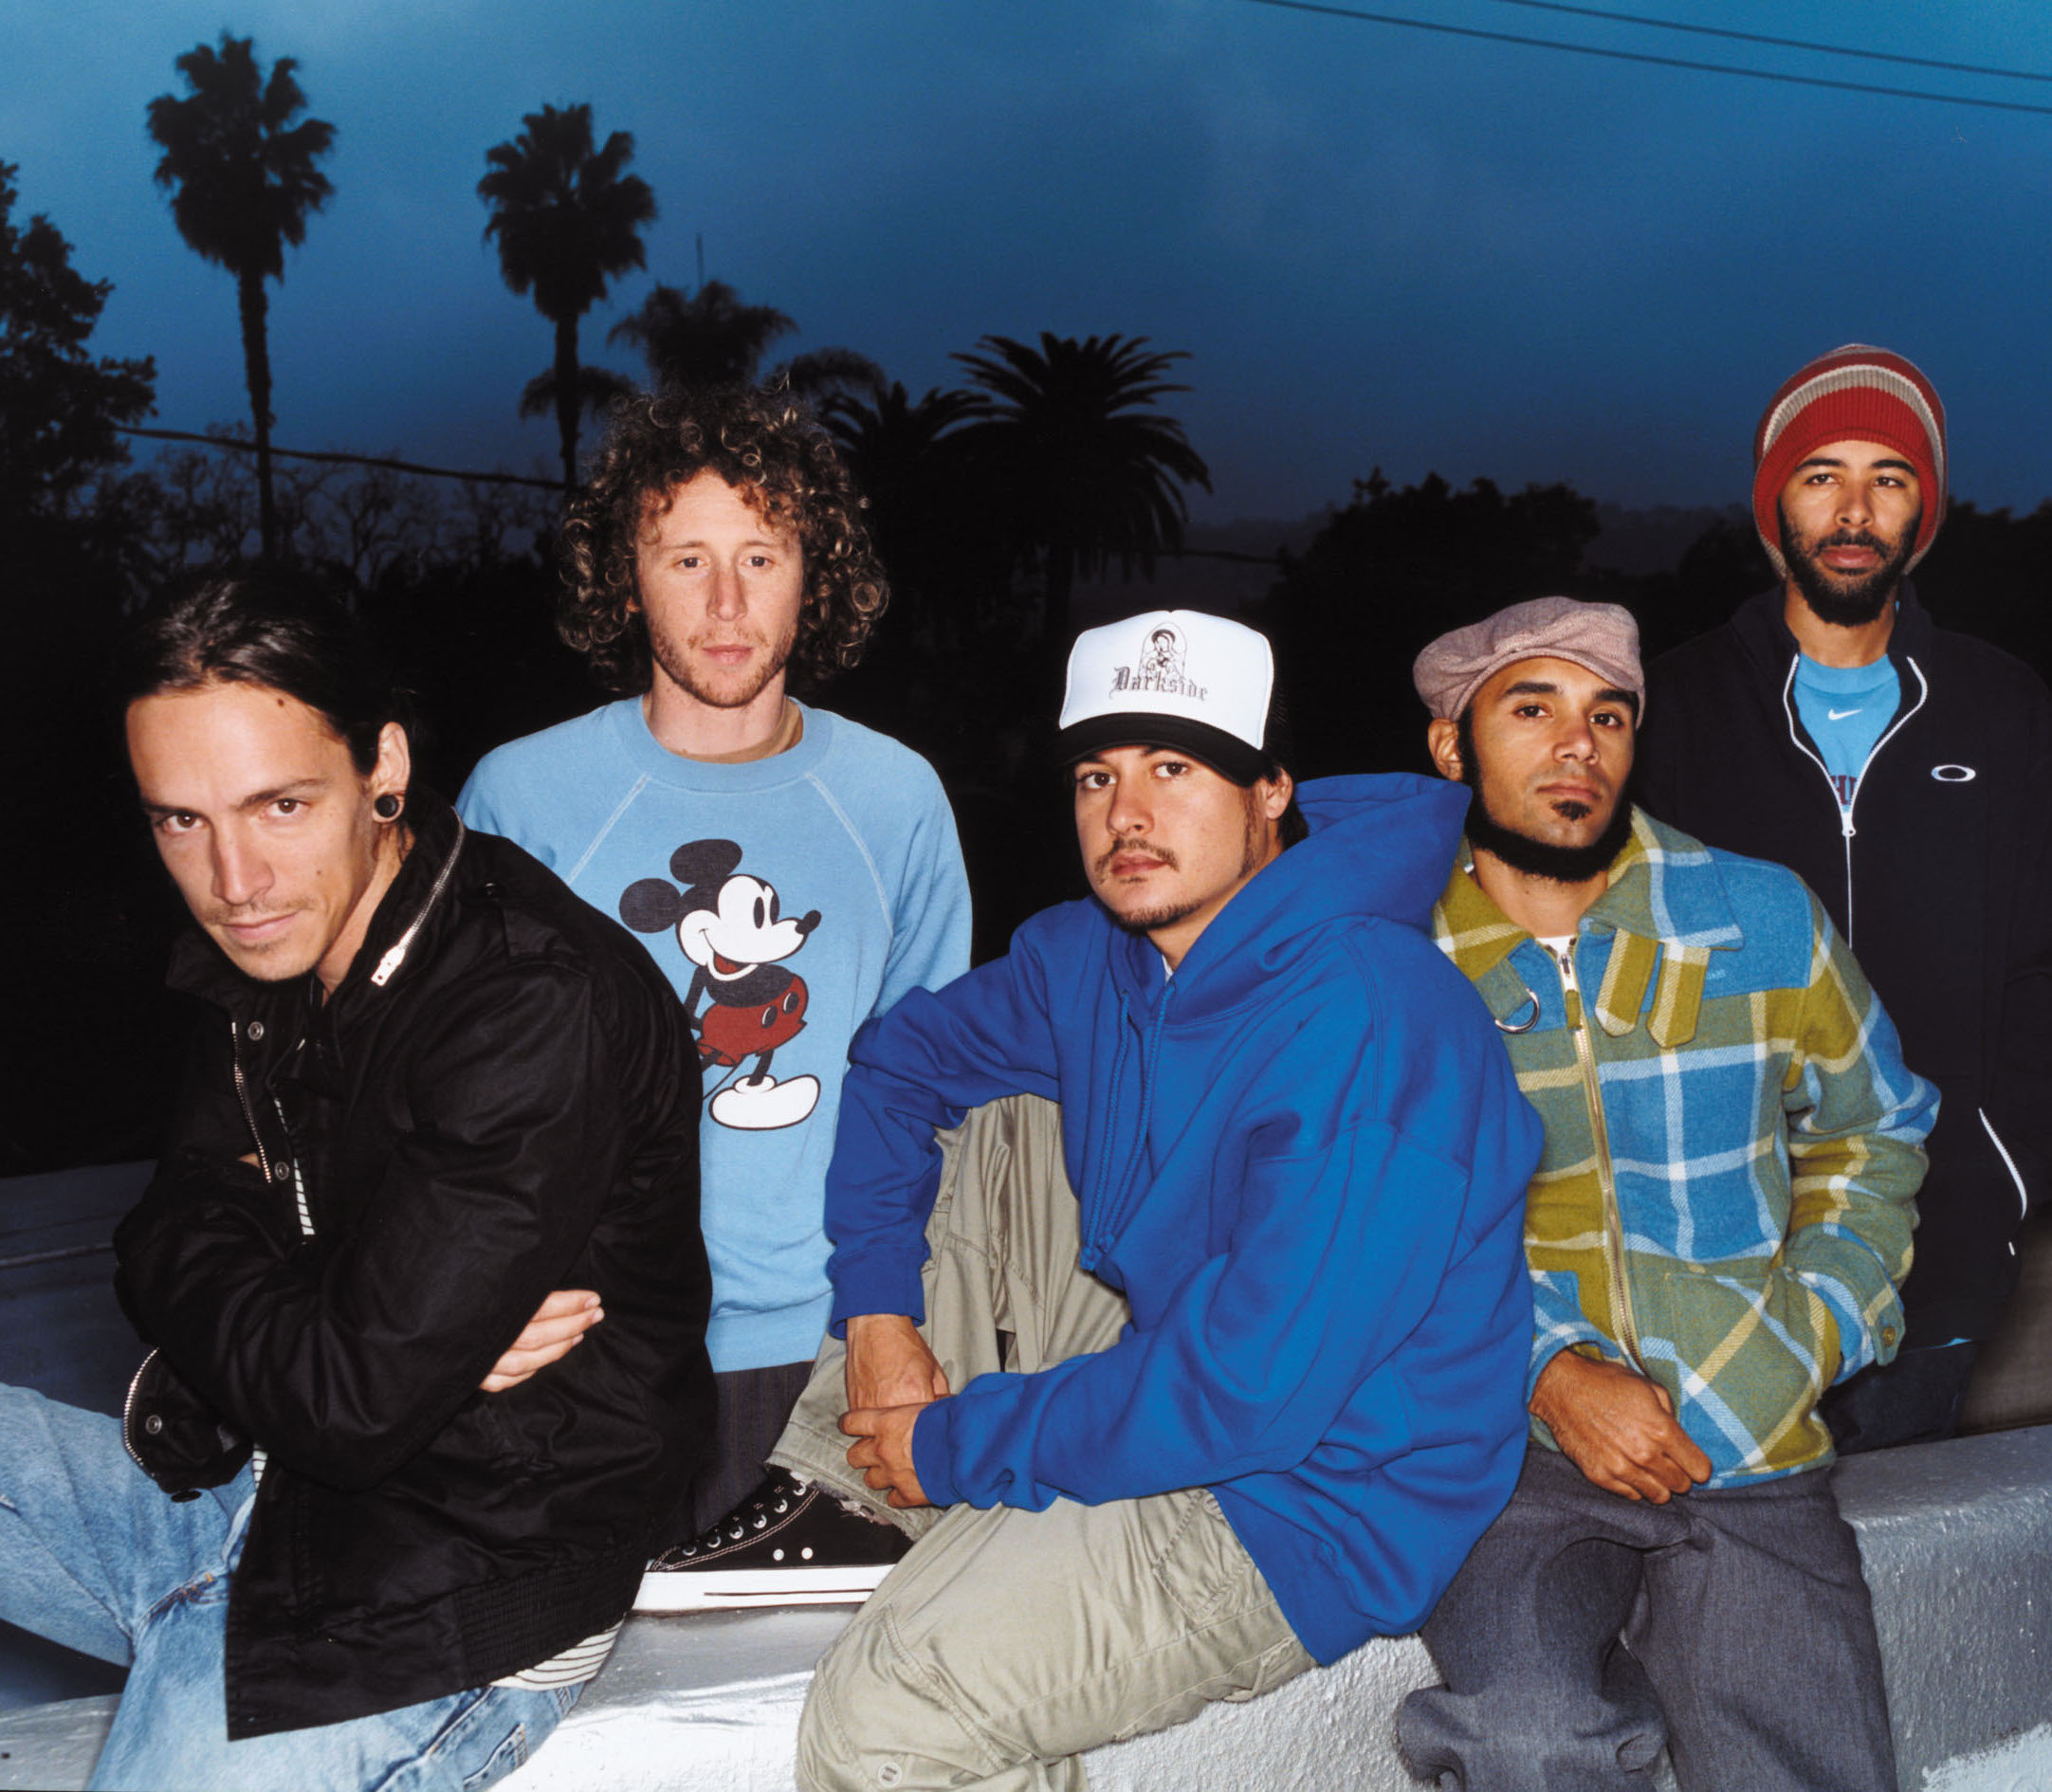 INCUBUS. [Photo used by permission of Incubus' Management & Sony Music Ent.]